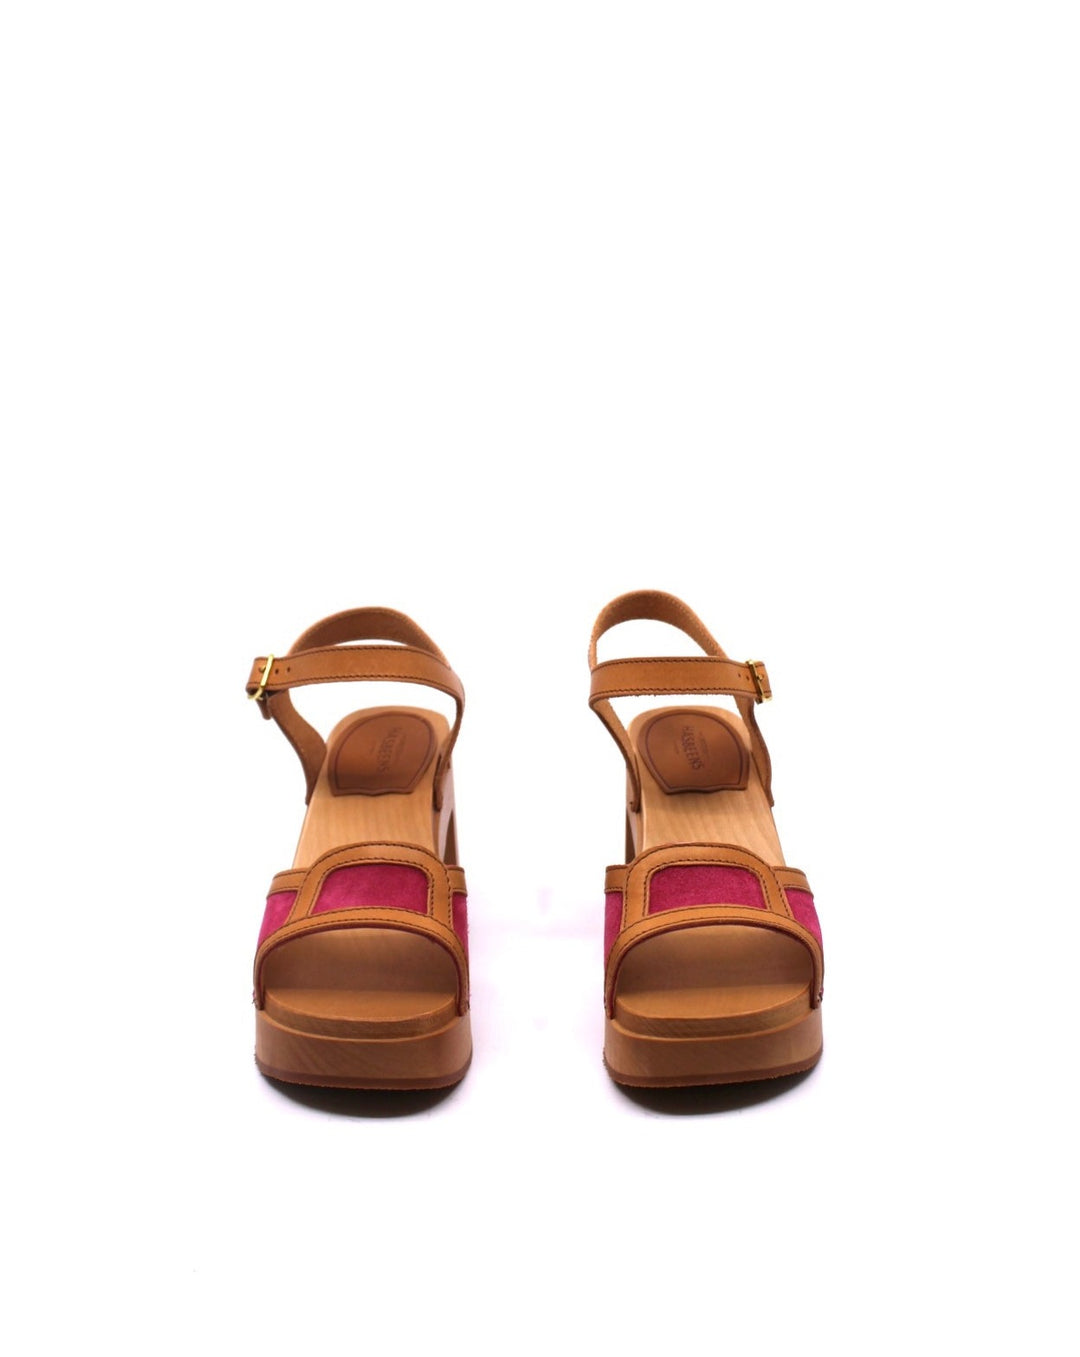 Swedish Hasbeens Sophisticated Sandal Bouganville - Dear Lucy